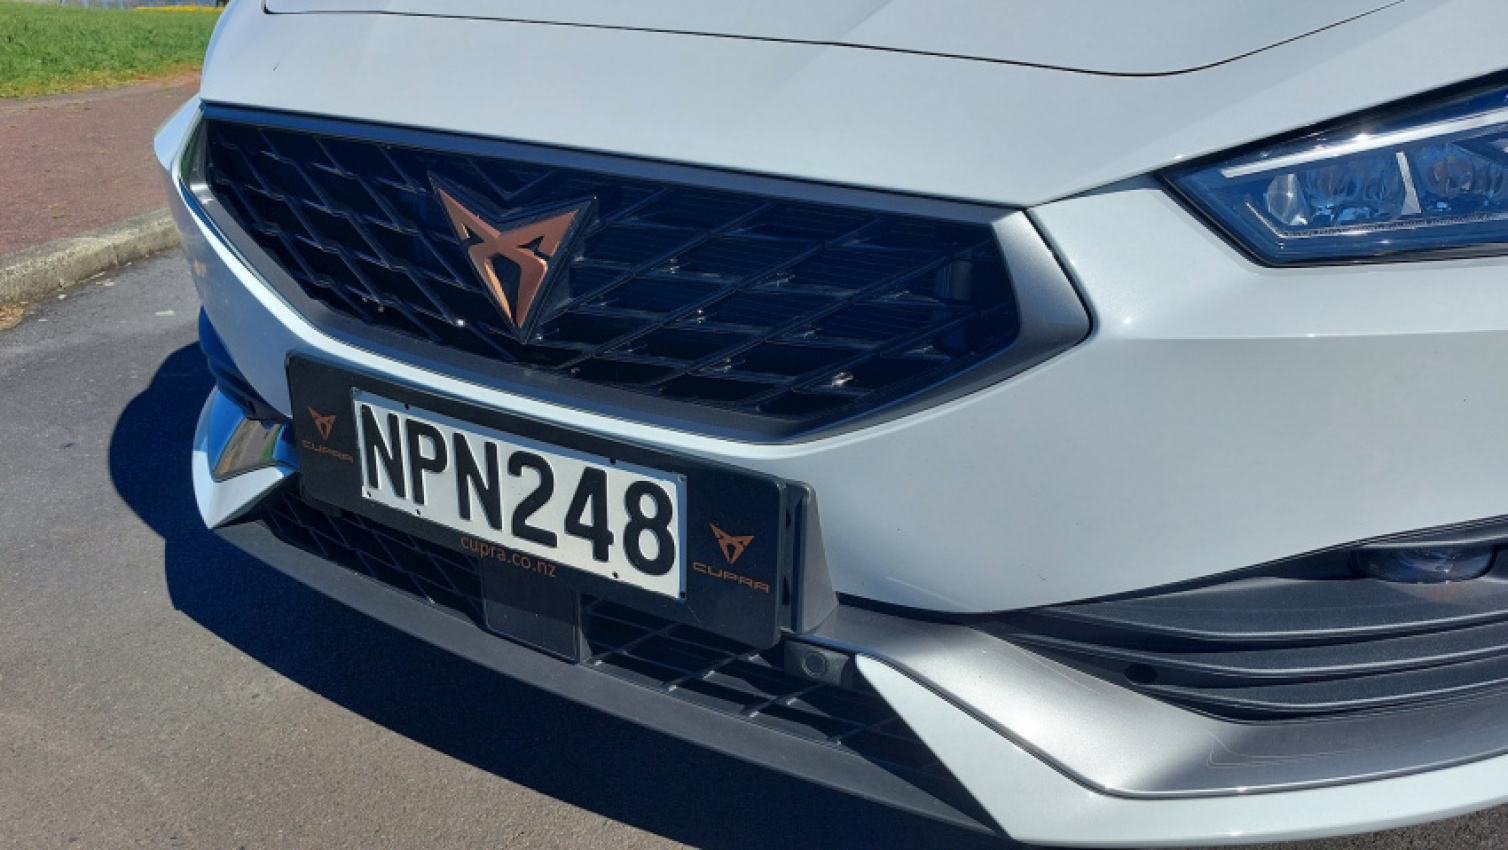 autos, cars, cupra, reviews, automotive industry, car, cars, driven, driven nz, motoring, national, new zealand, news, nz, road tests, station wagon, cupra leon vz sportstourer review: fourth estate is a fan